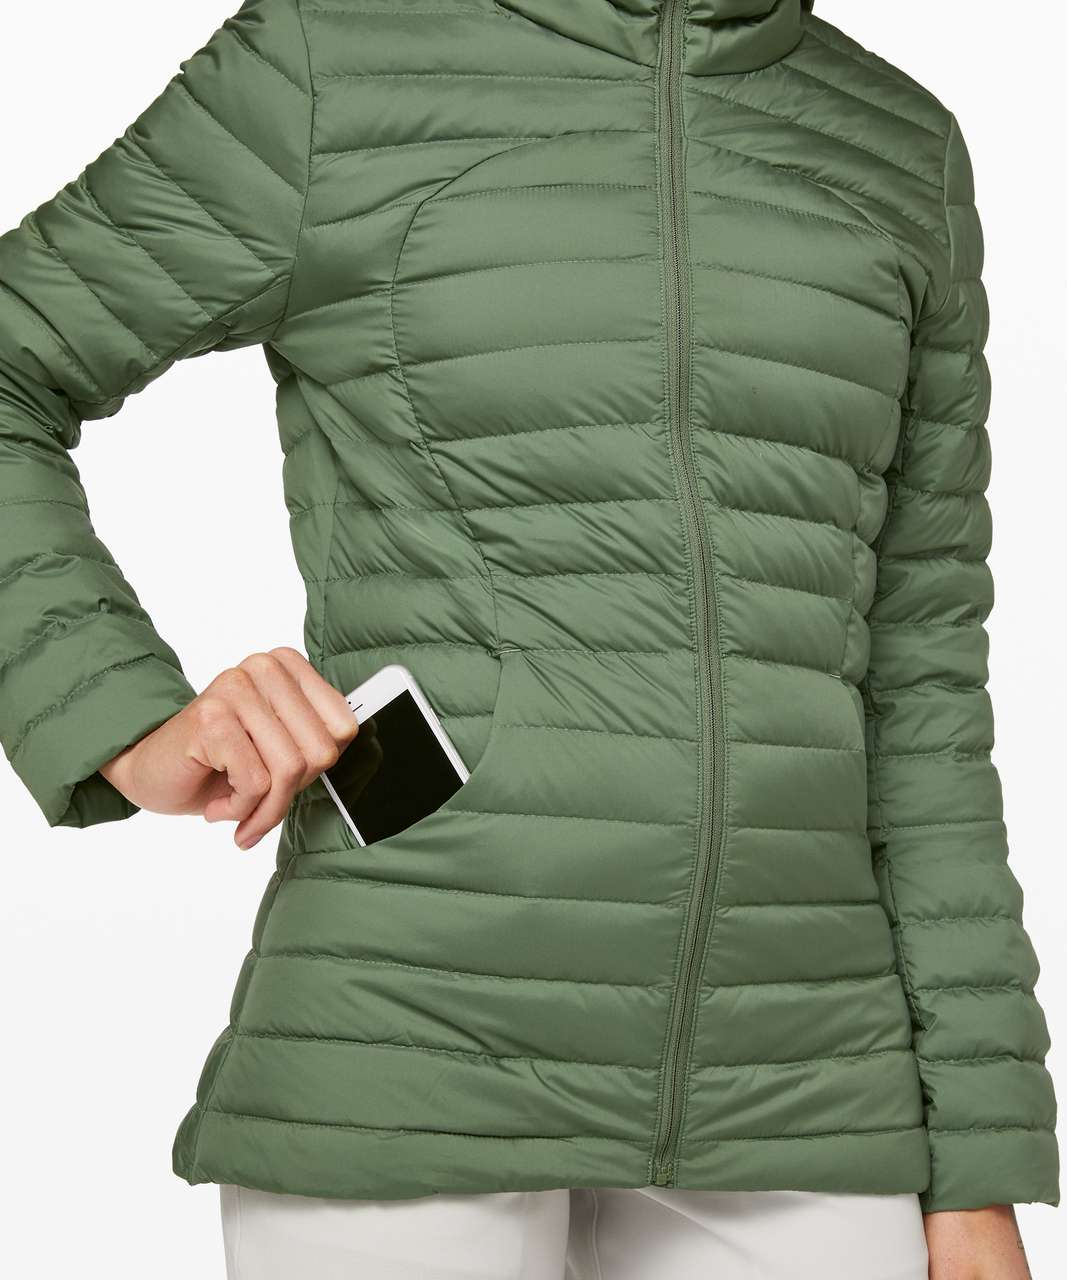 Lululemon Pack It Down Jacket - Green Twill (First Release)